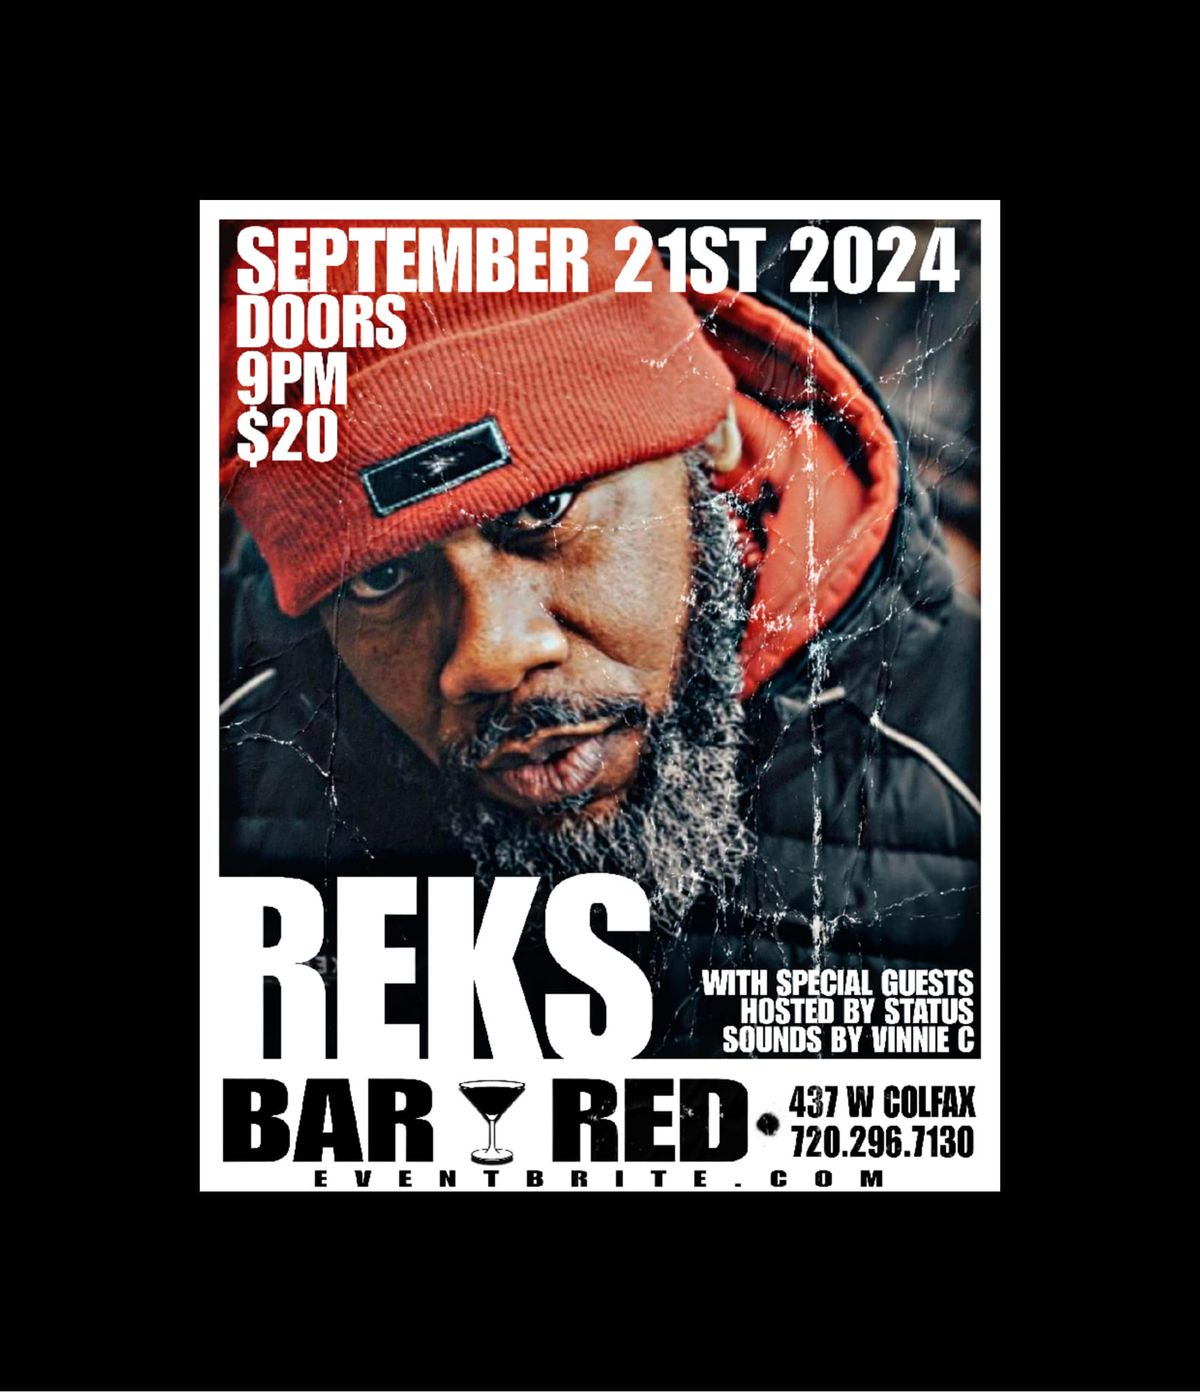 REKS Live at Bar Red with Special Guests